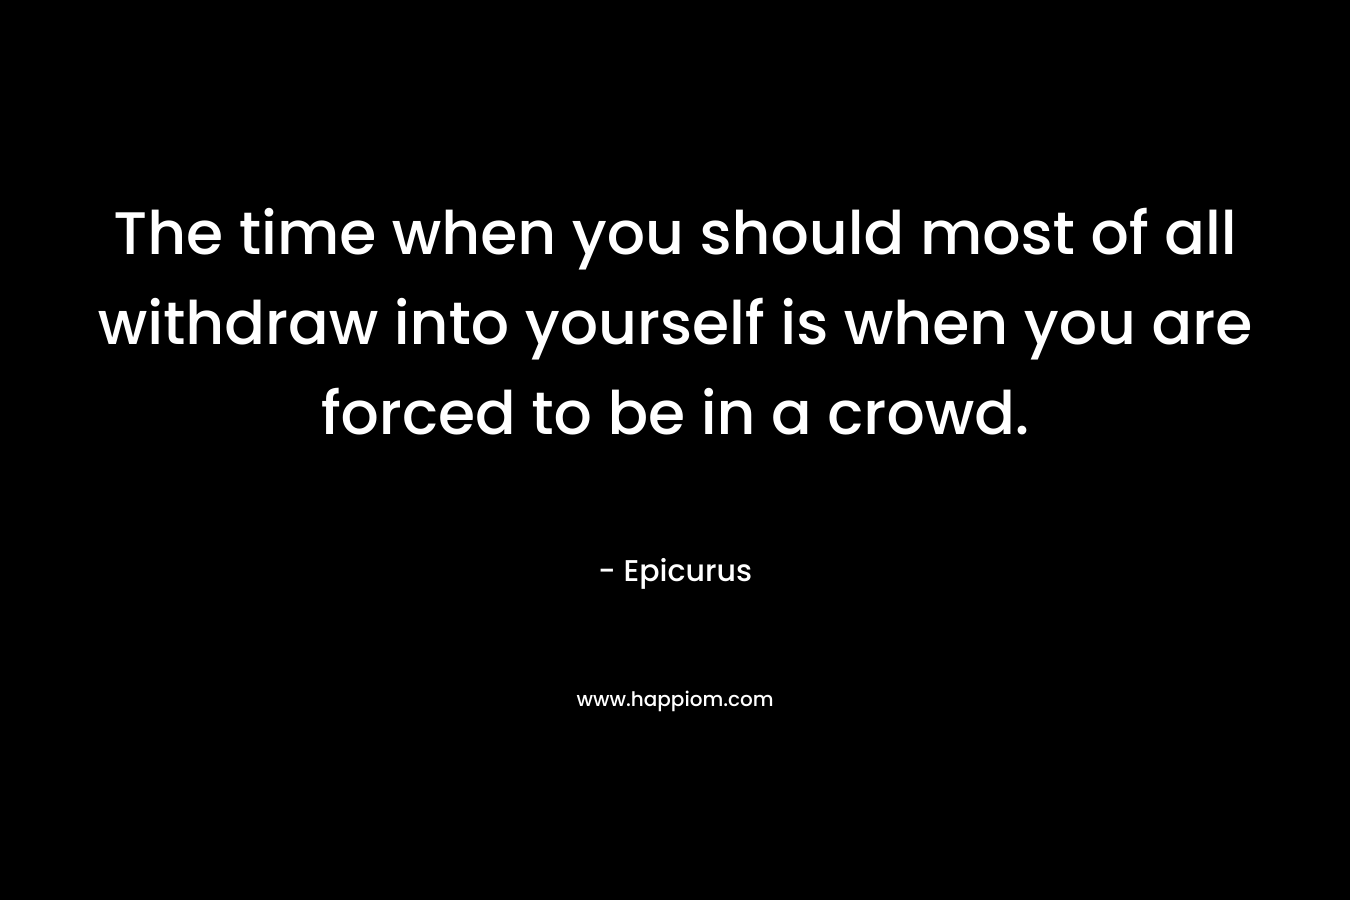 The time when you should most of all withdraw into yourself is when you are forced to be in a crowd. – Epicurus